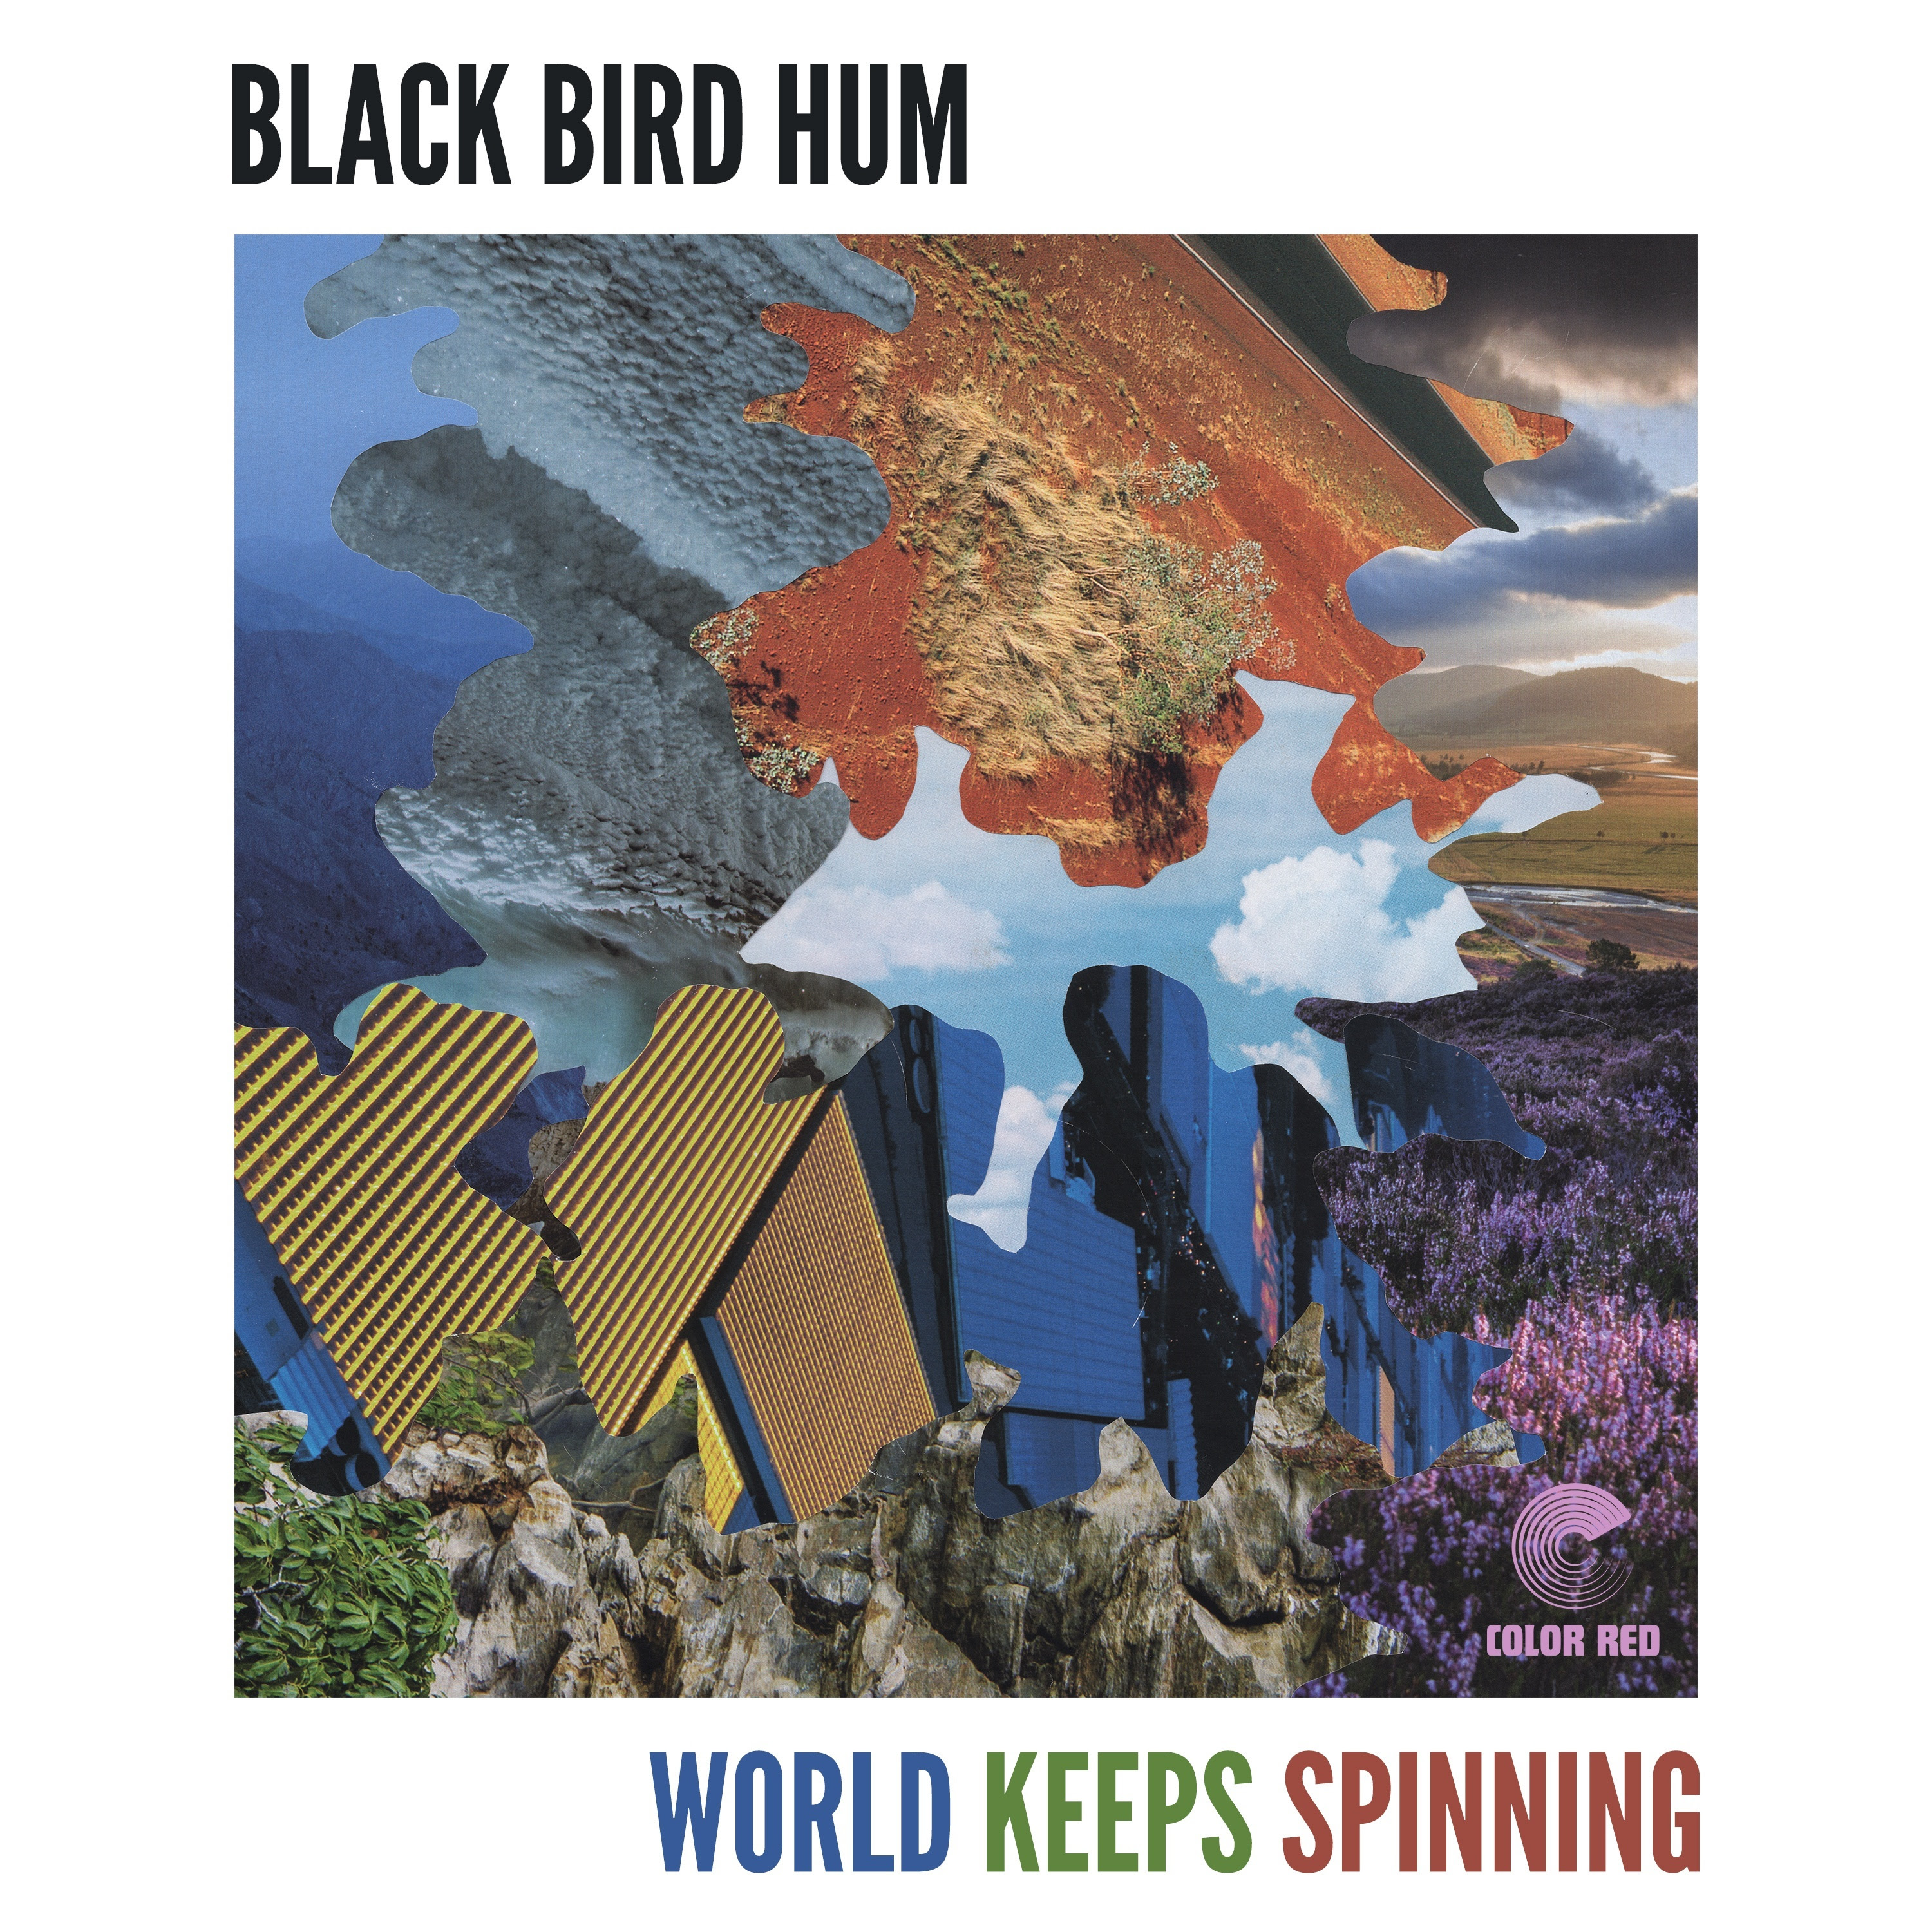 Black Bird Hum Reminds Us That the "World Keeps Spinning" No Matter How Hard Life Gets